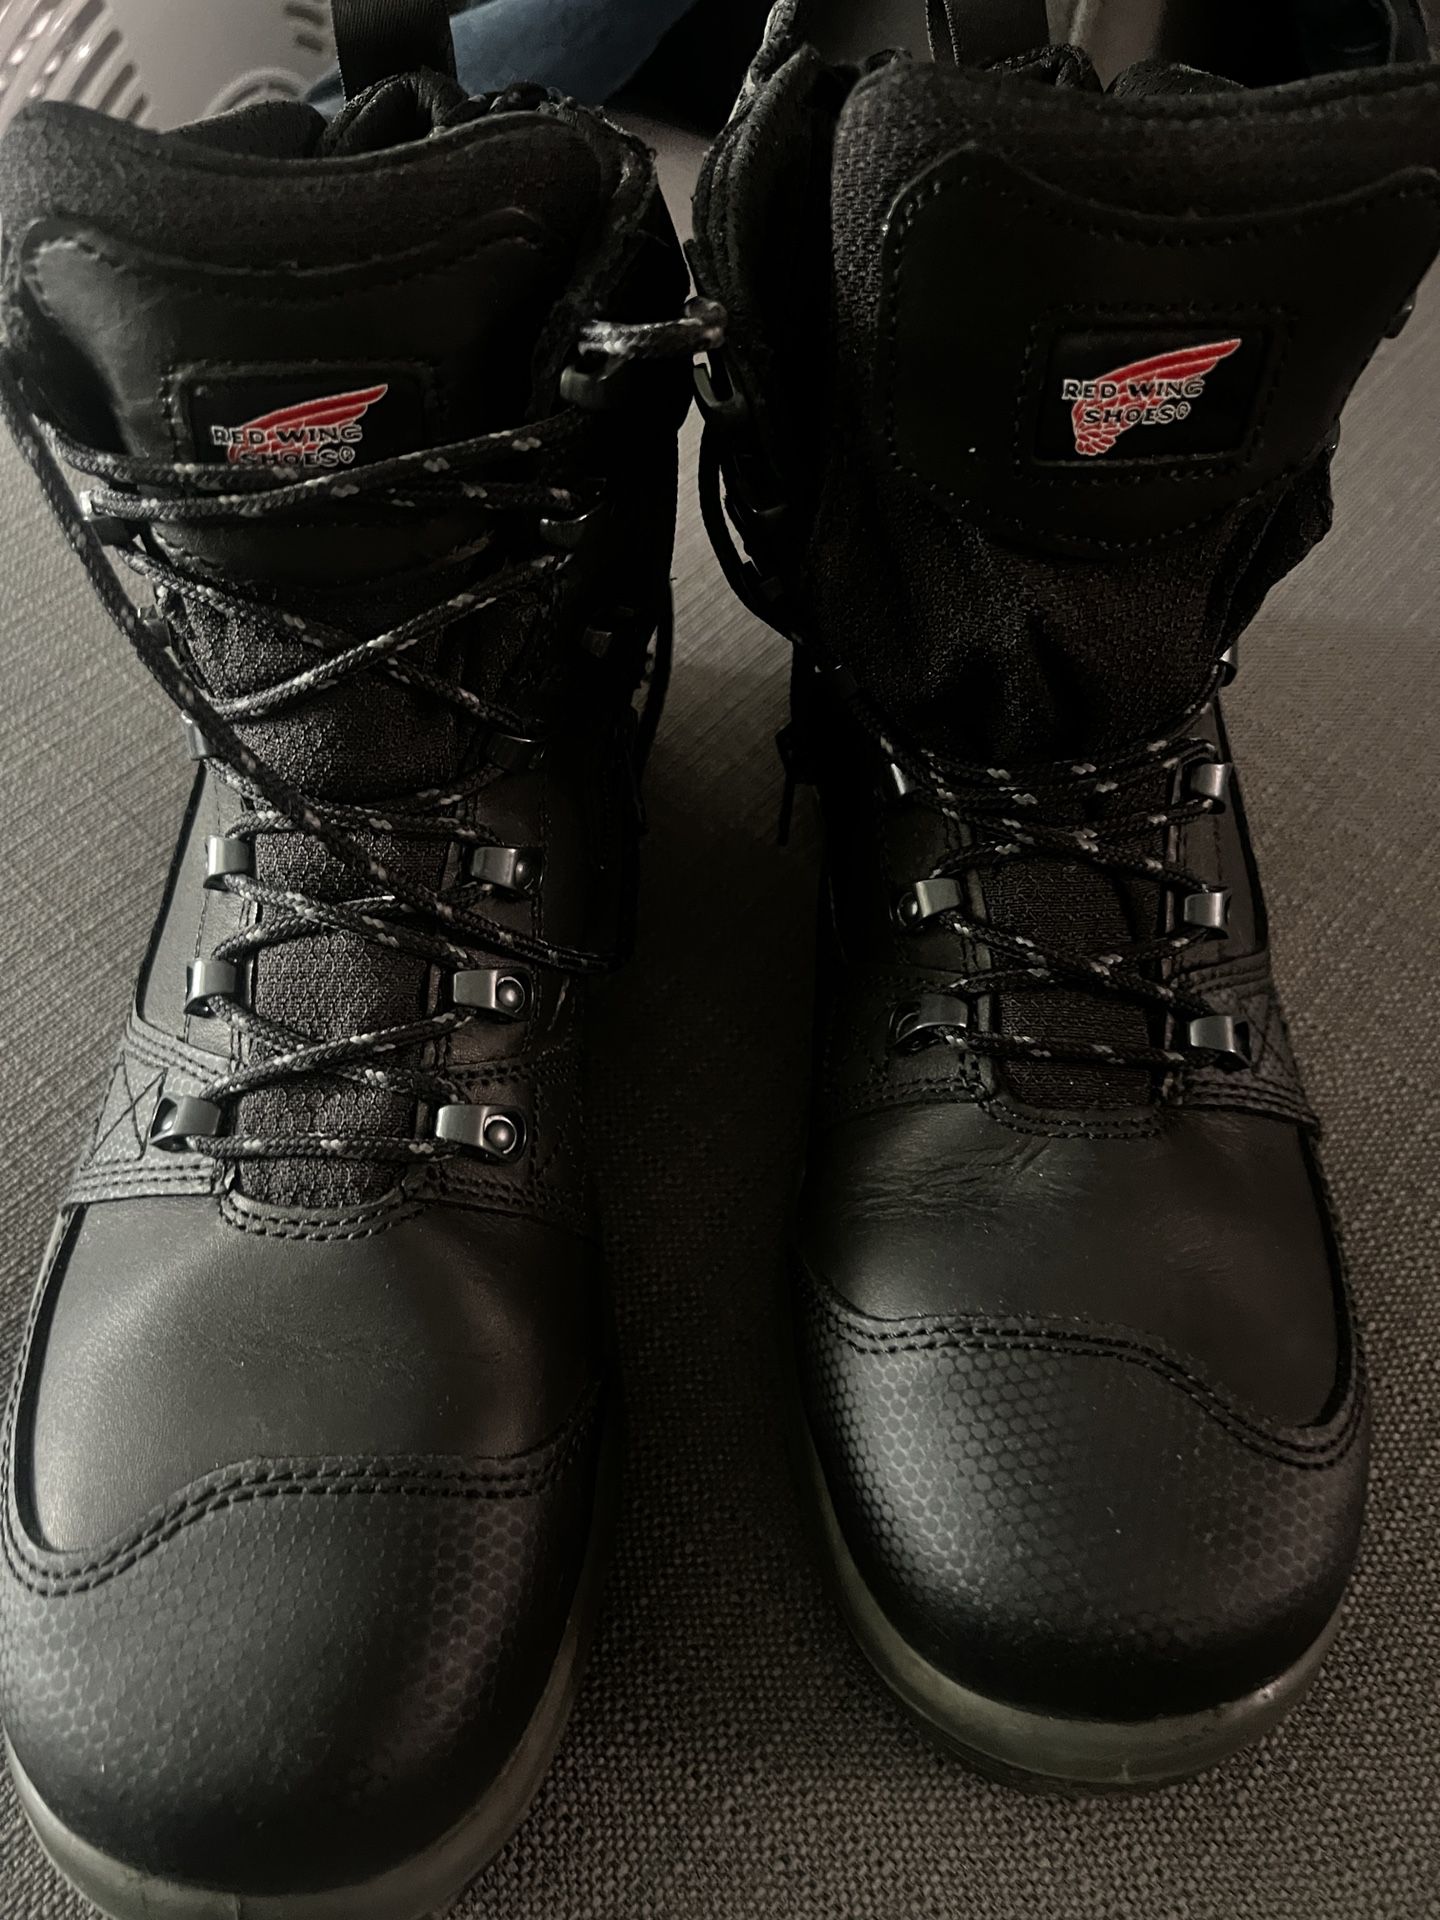 Red Wing Composite Toe Tradesman Boots $120 Size 10